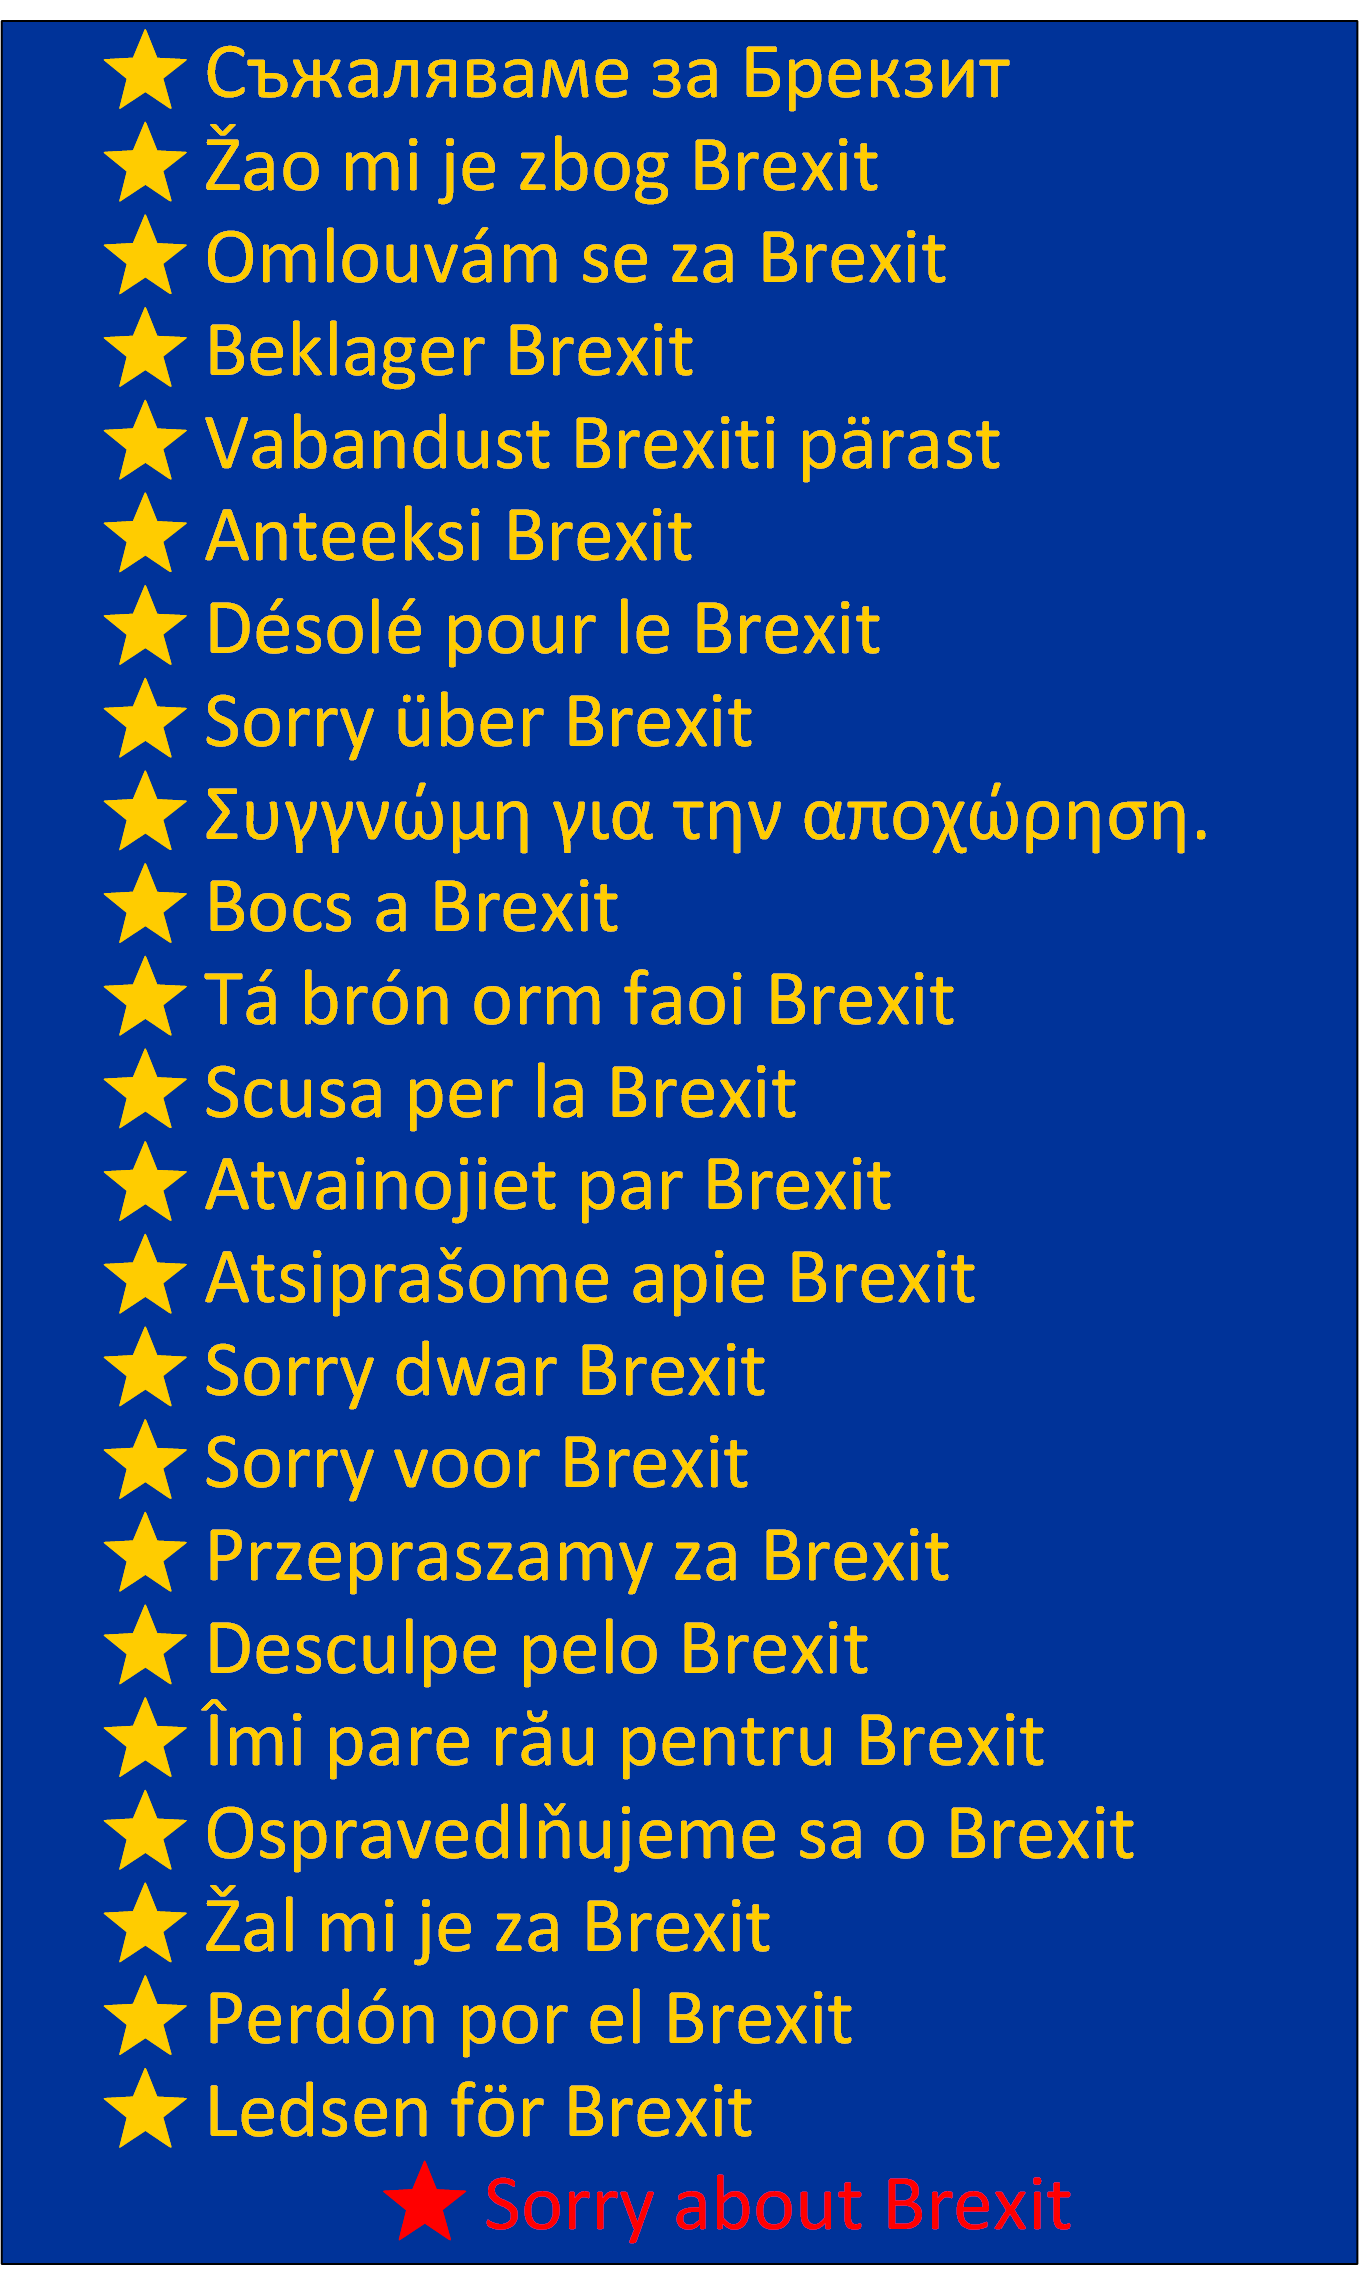 Sorry about Brexit